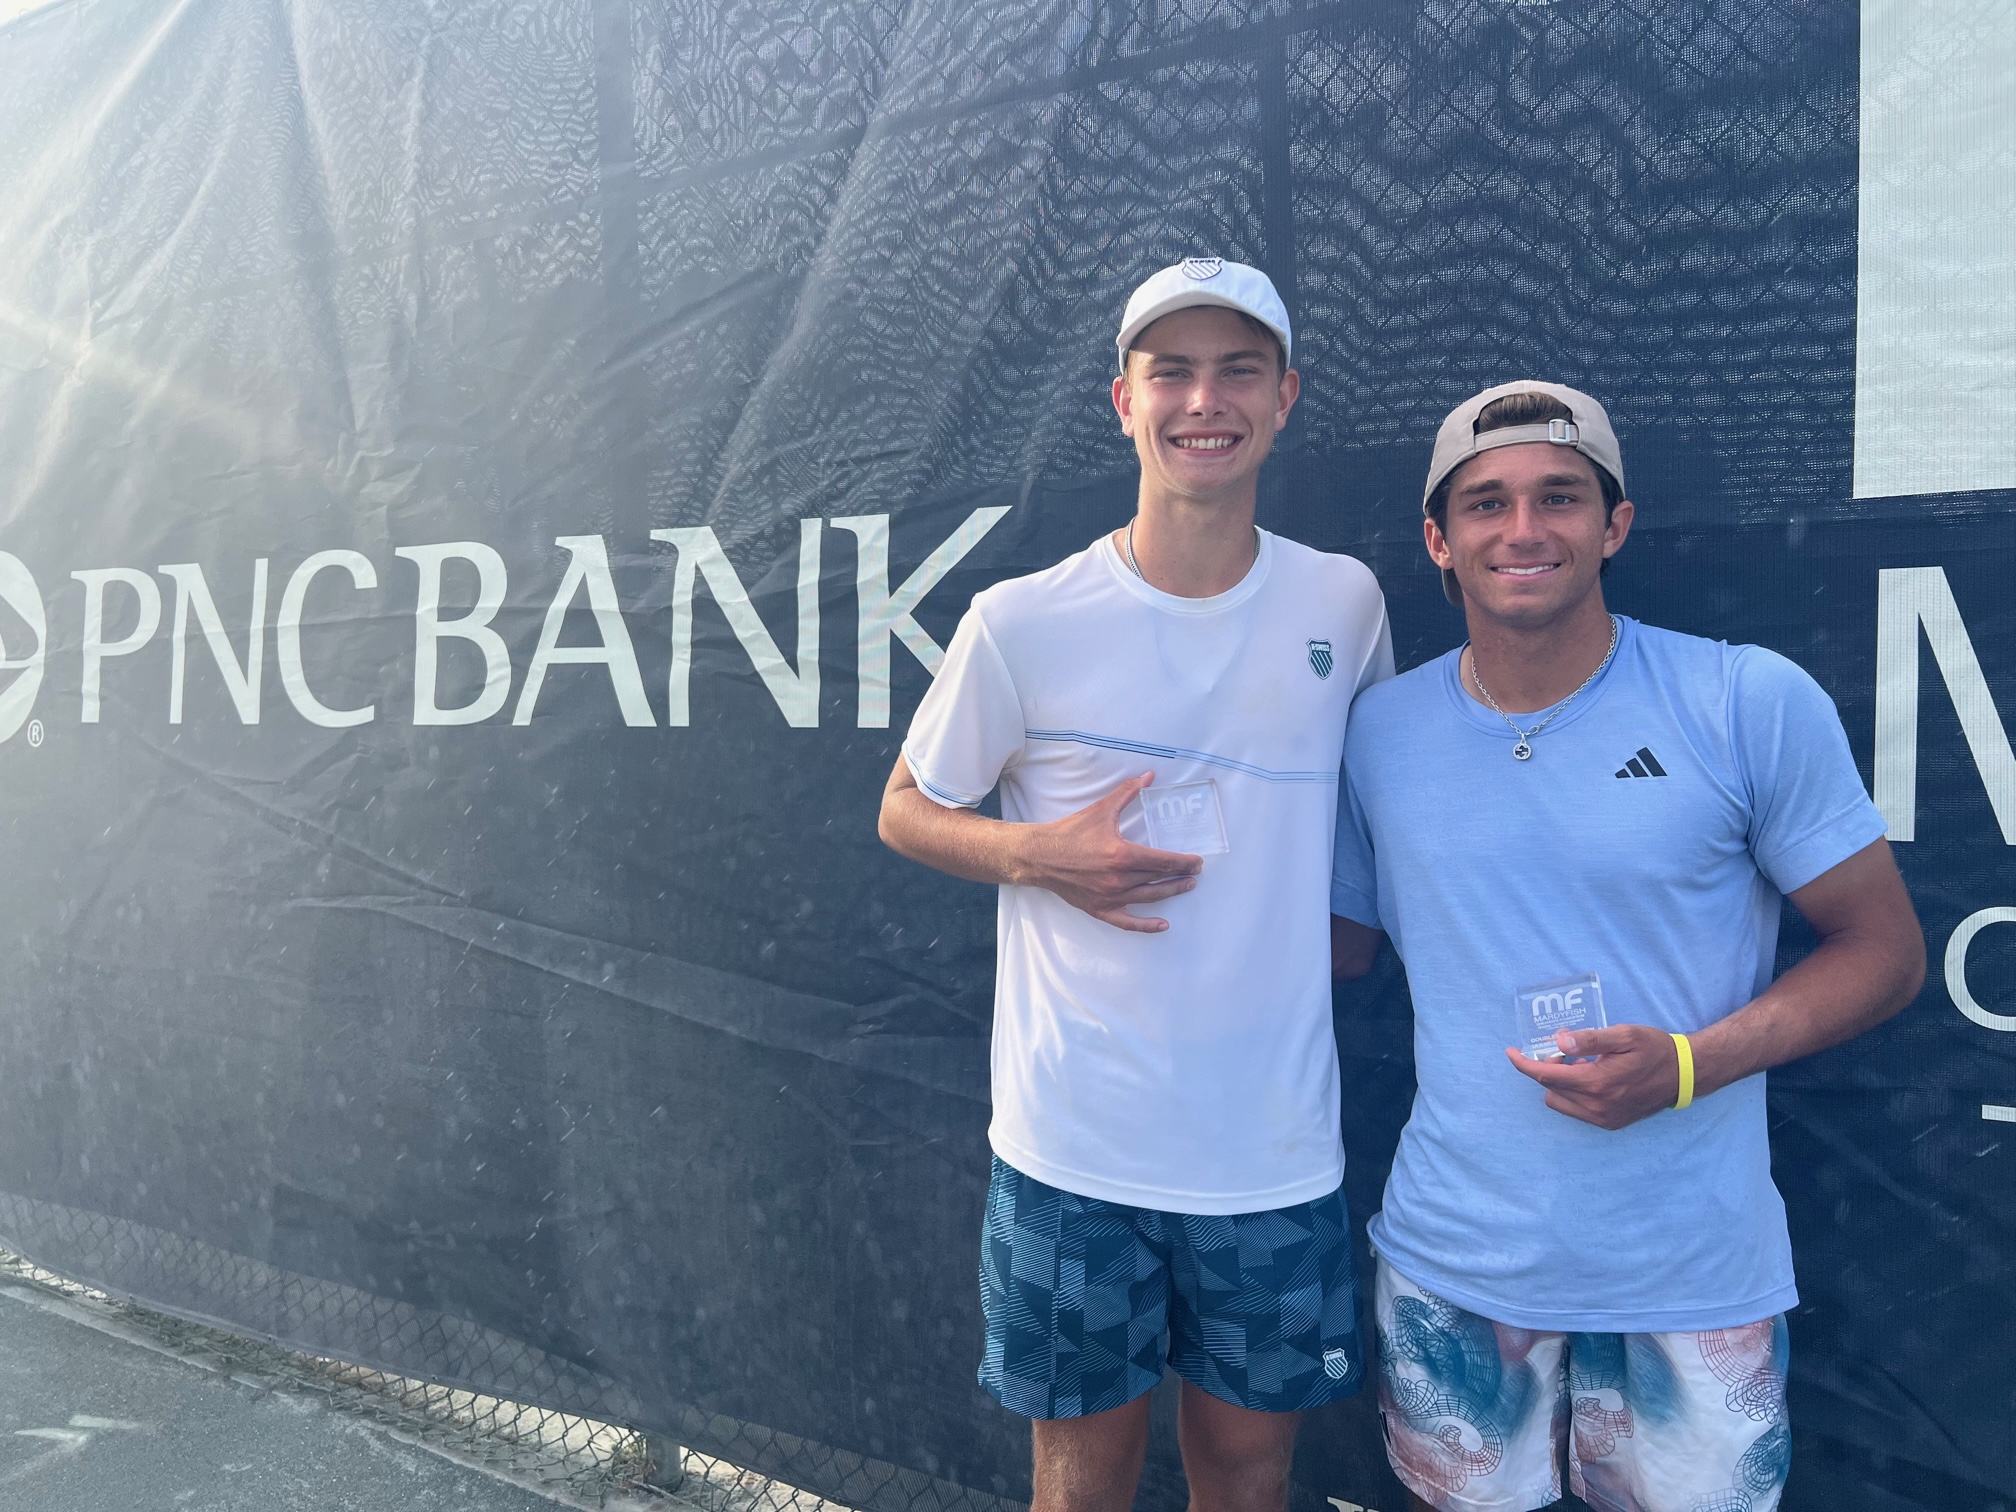 Young 17YearOld U.S. Talents Woestendick, Razeghi Win First Pro Title